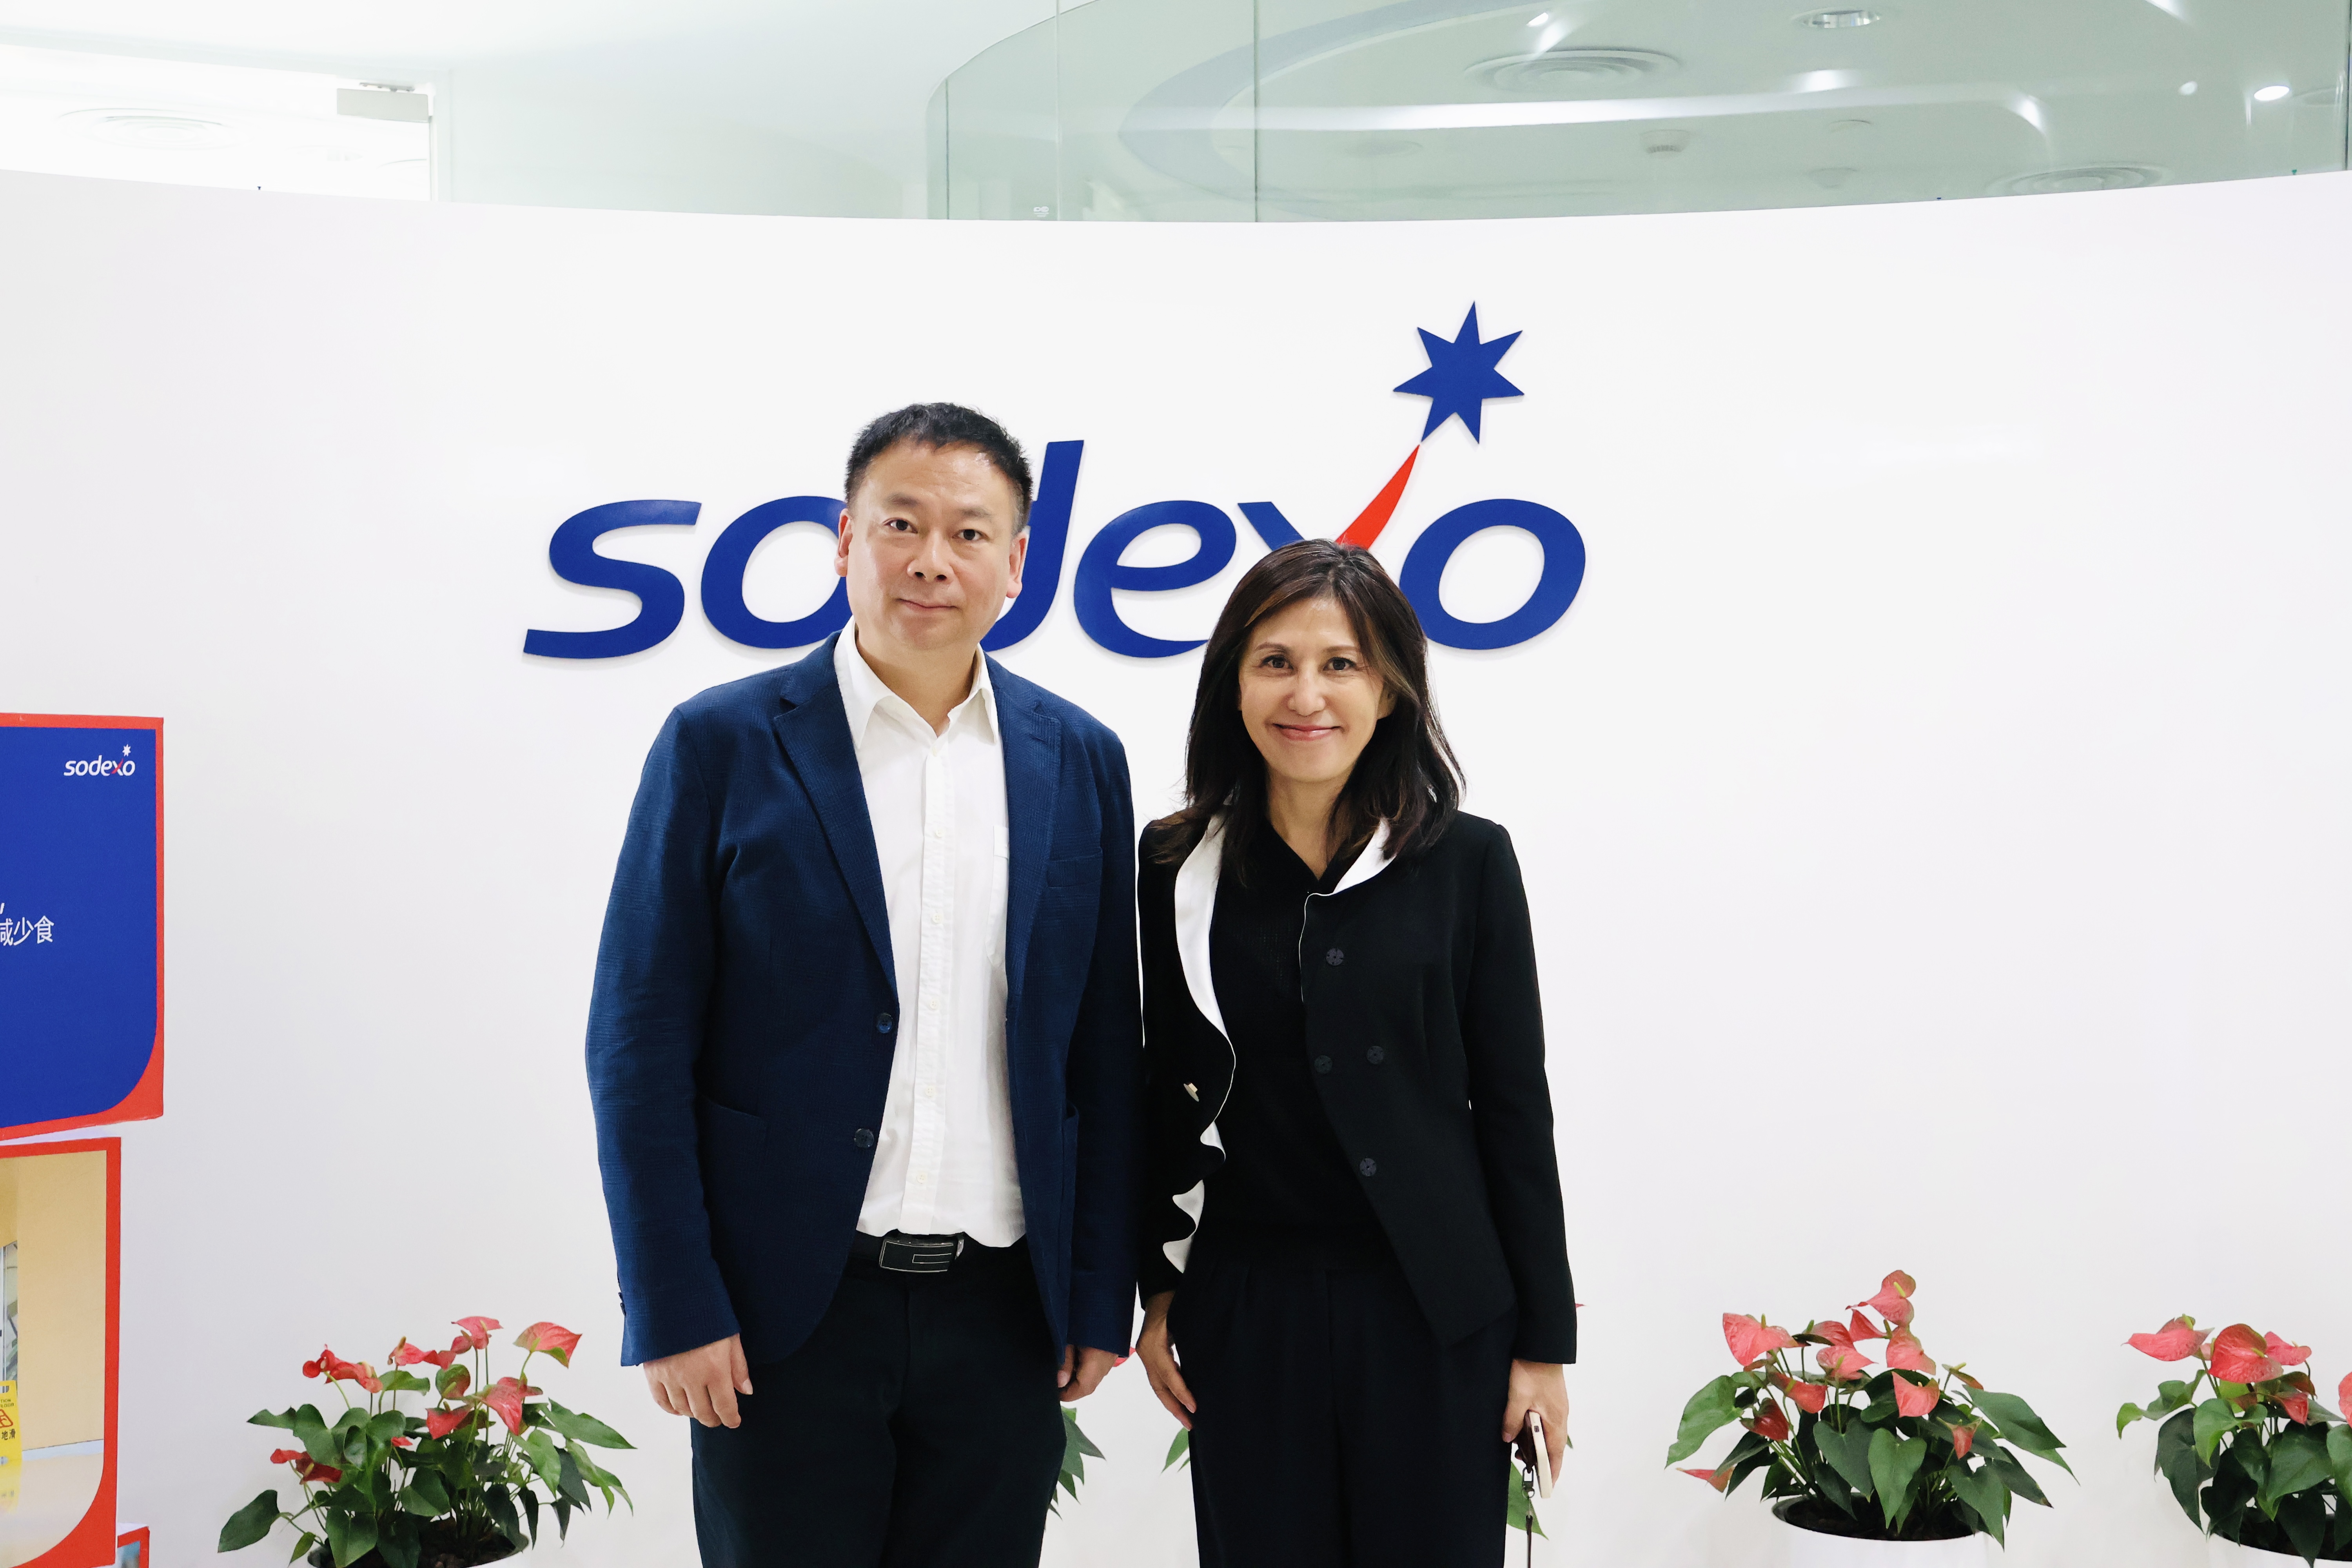 Chengdu Municipal Center for Openness and Cooperation Visit Sodexo China.jpg